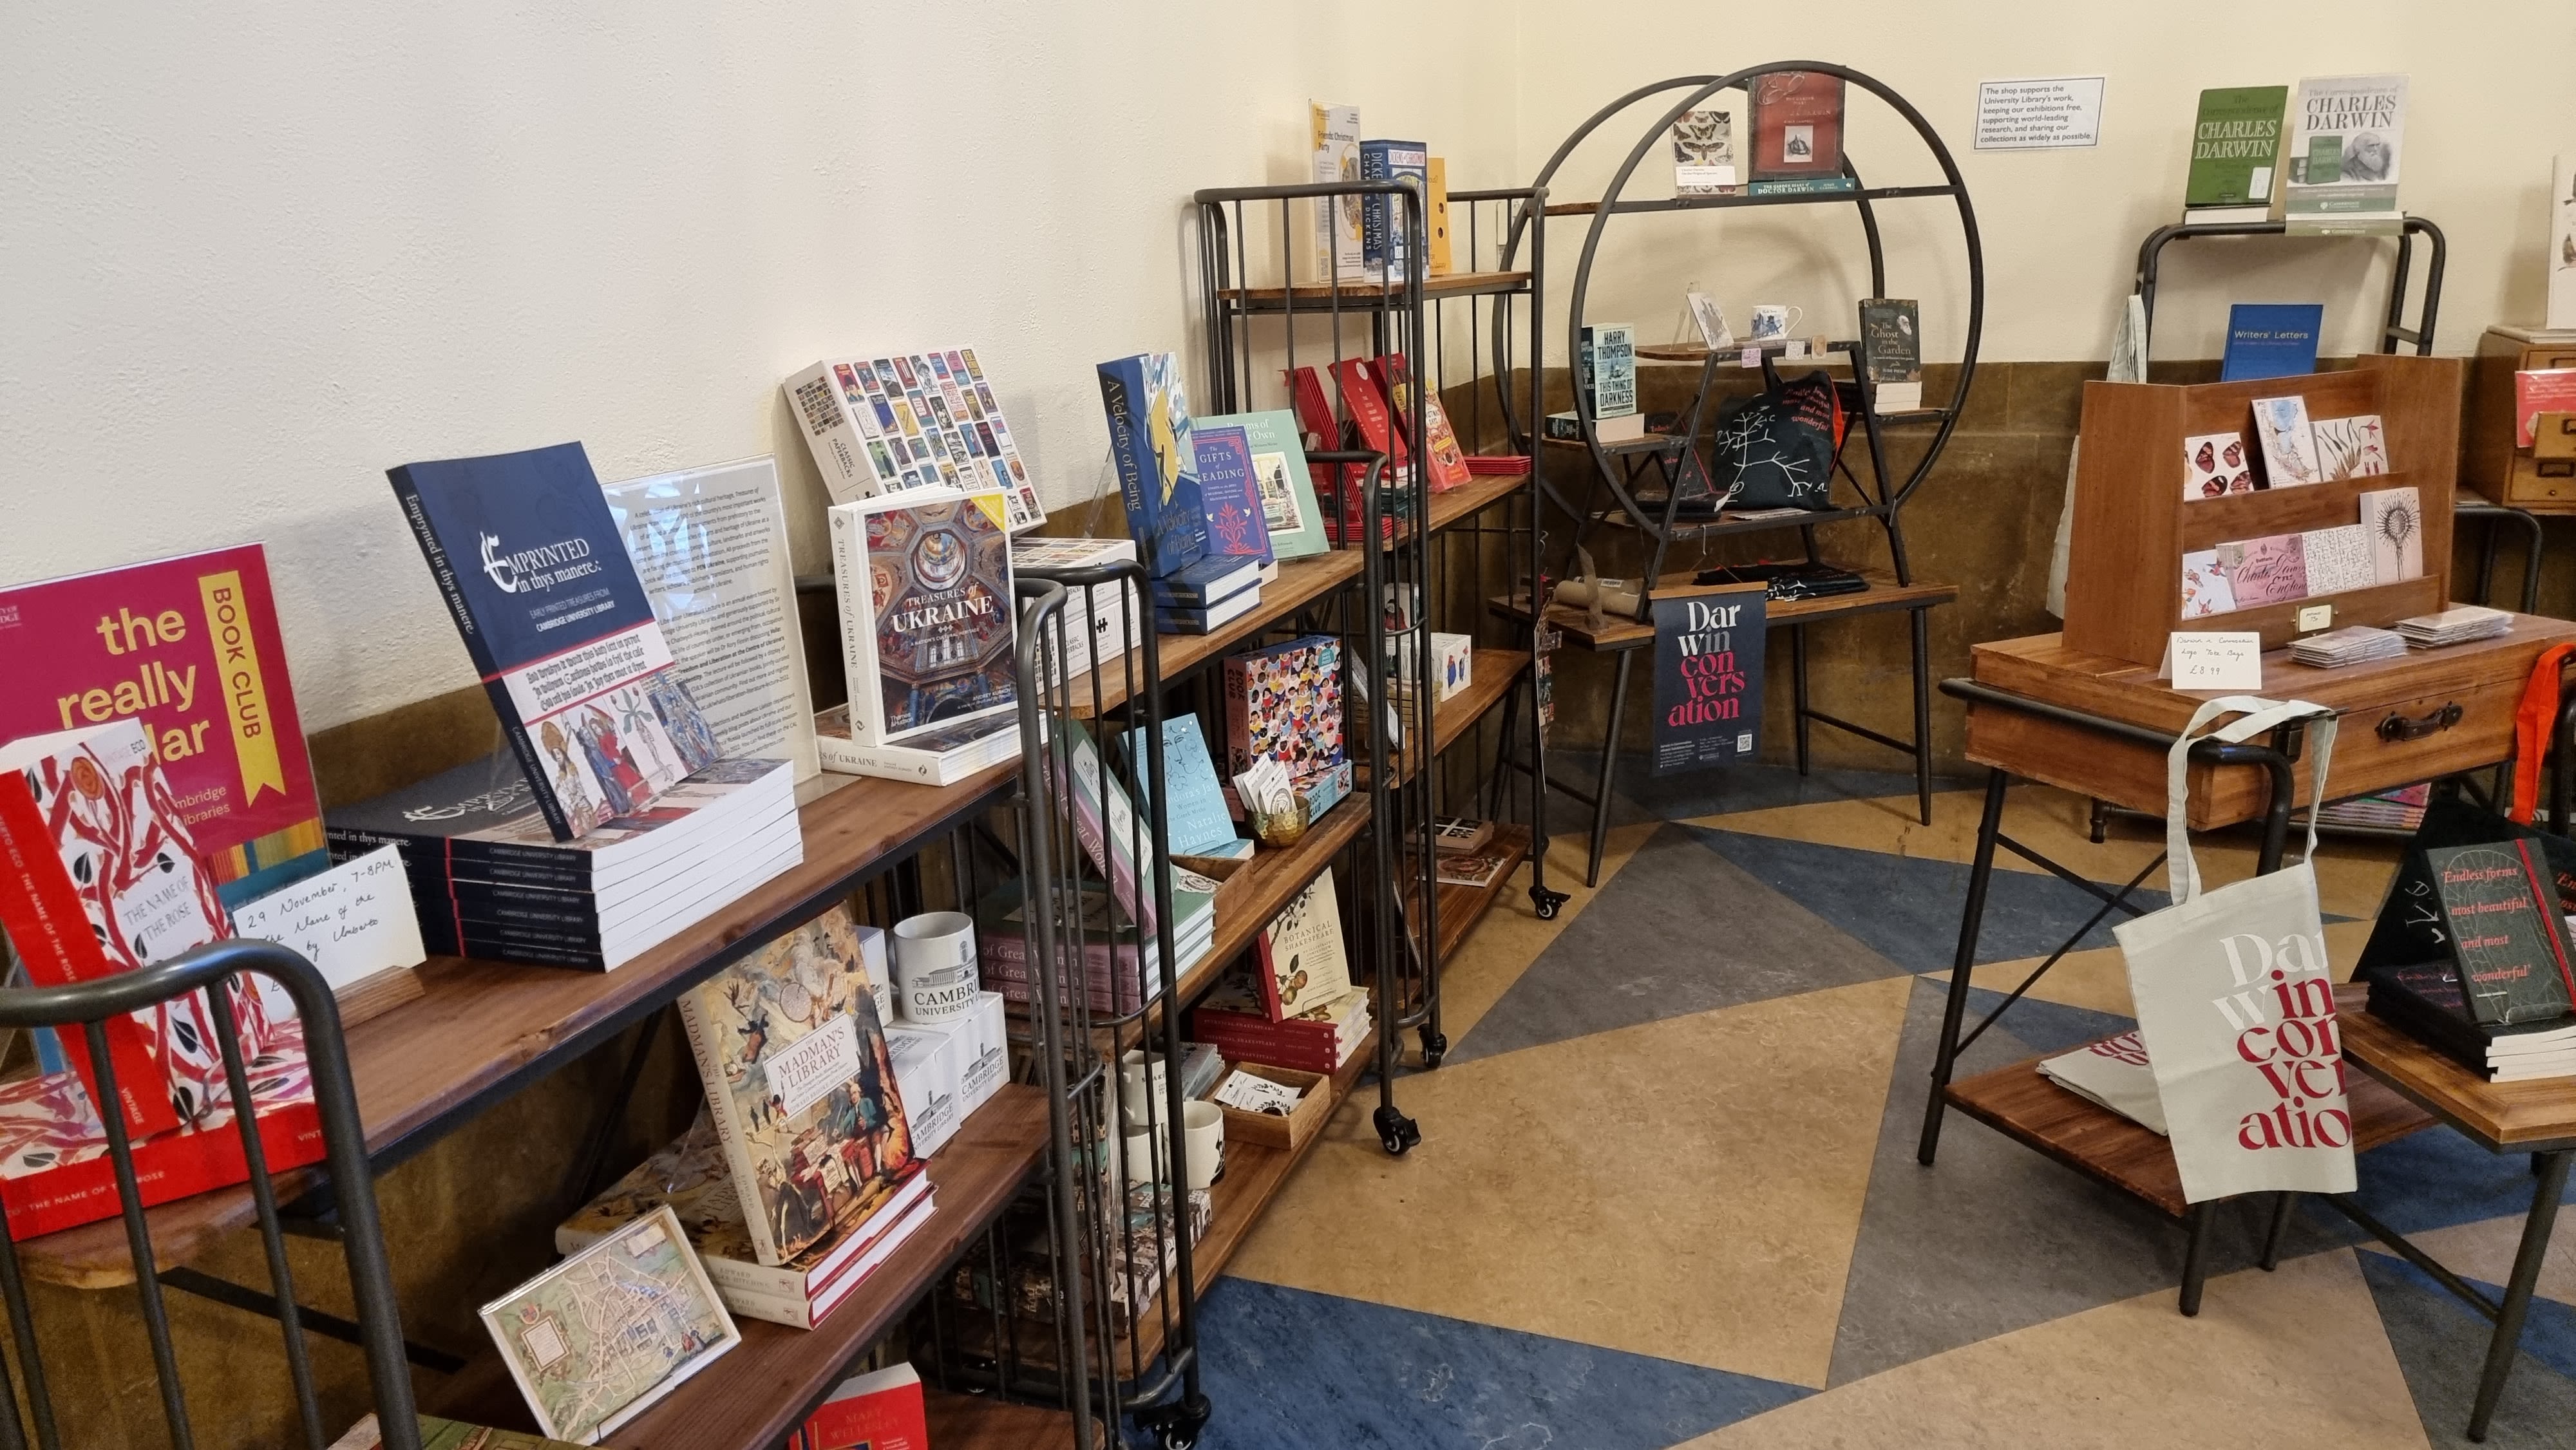 Books are displayed on open shelves in the shop